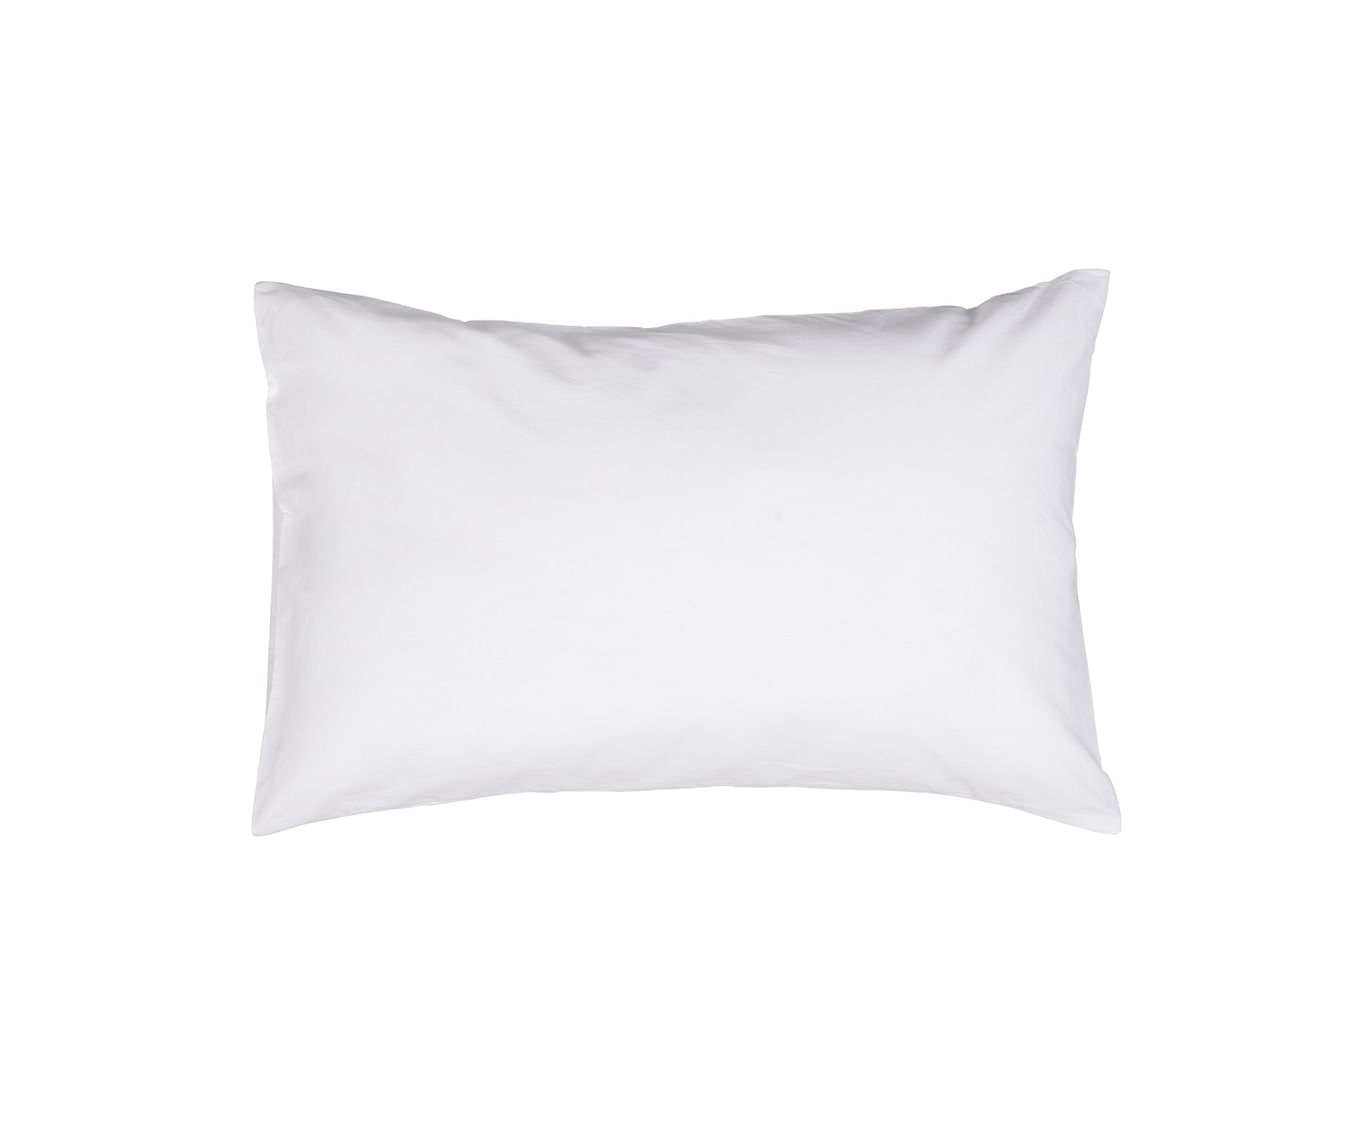 Soft Pillows for Sleeping - Set of 2